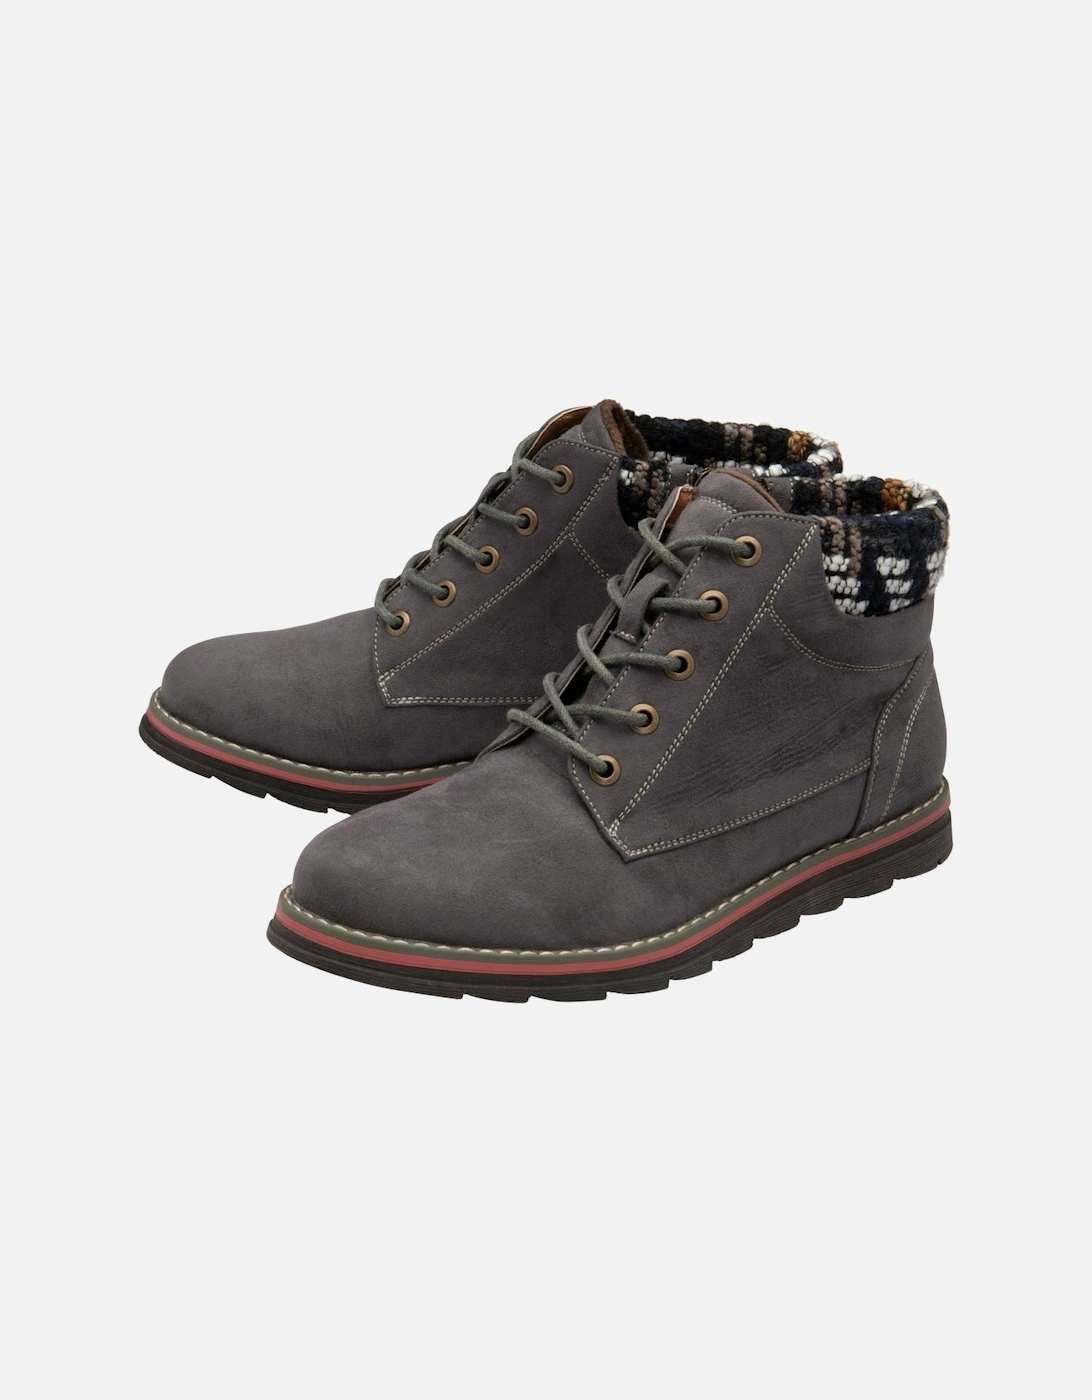 Sycamore Womens Ankle Boots